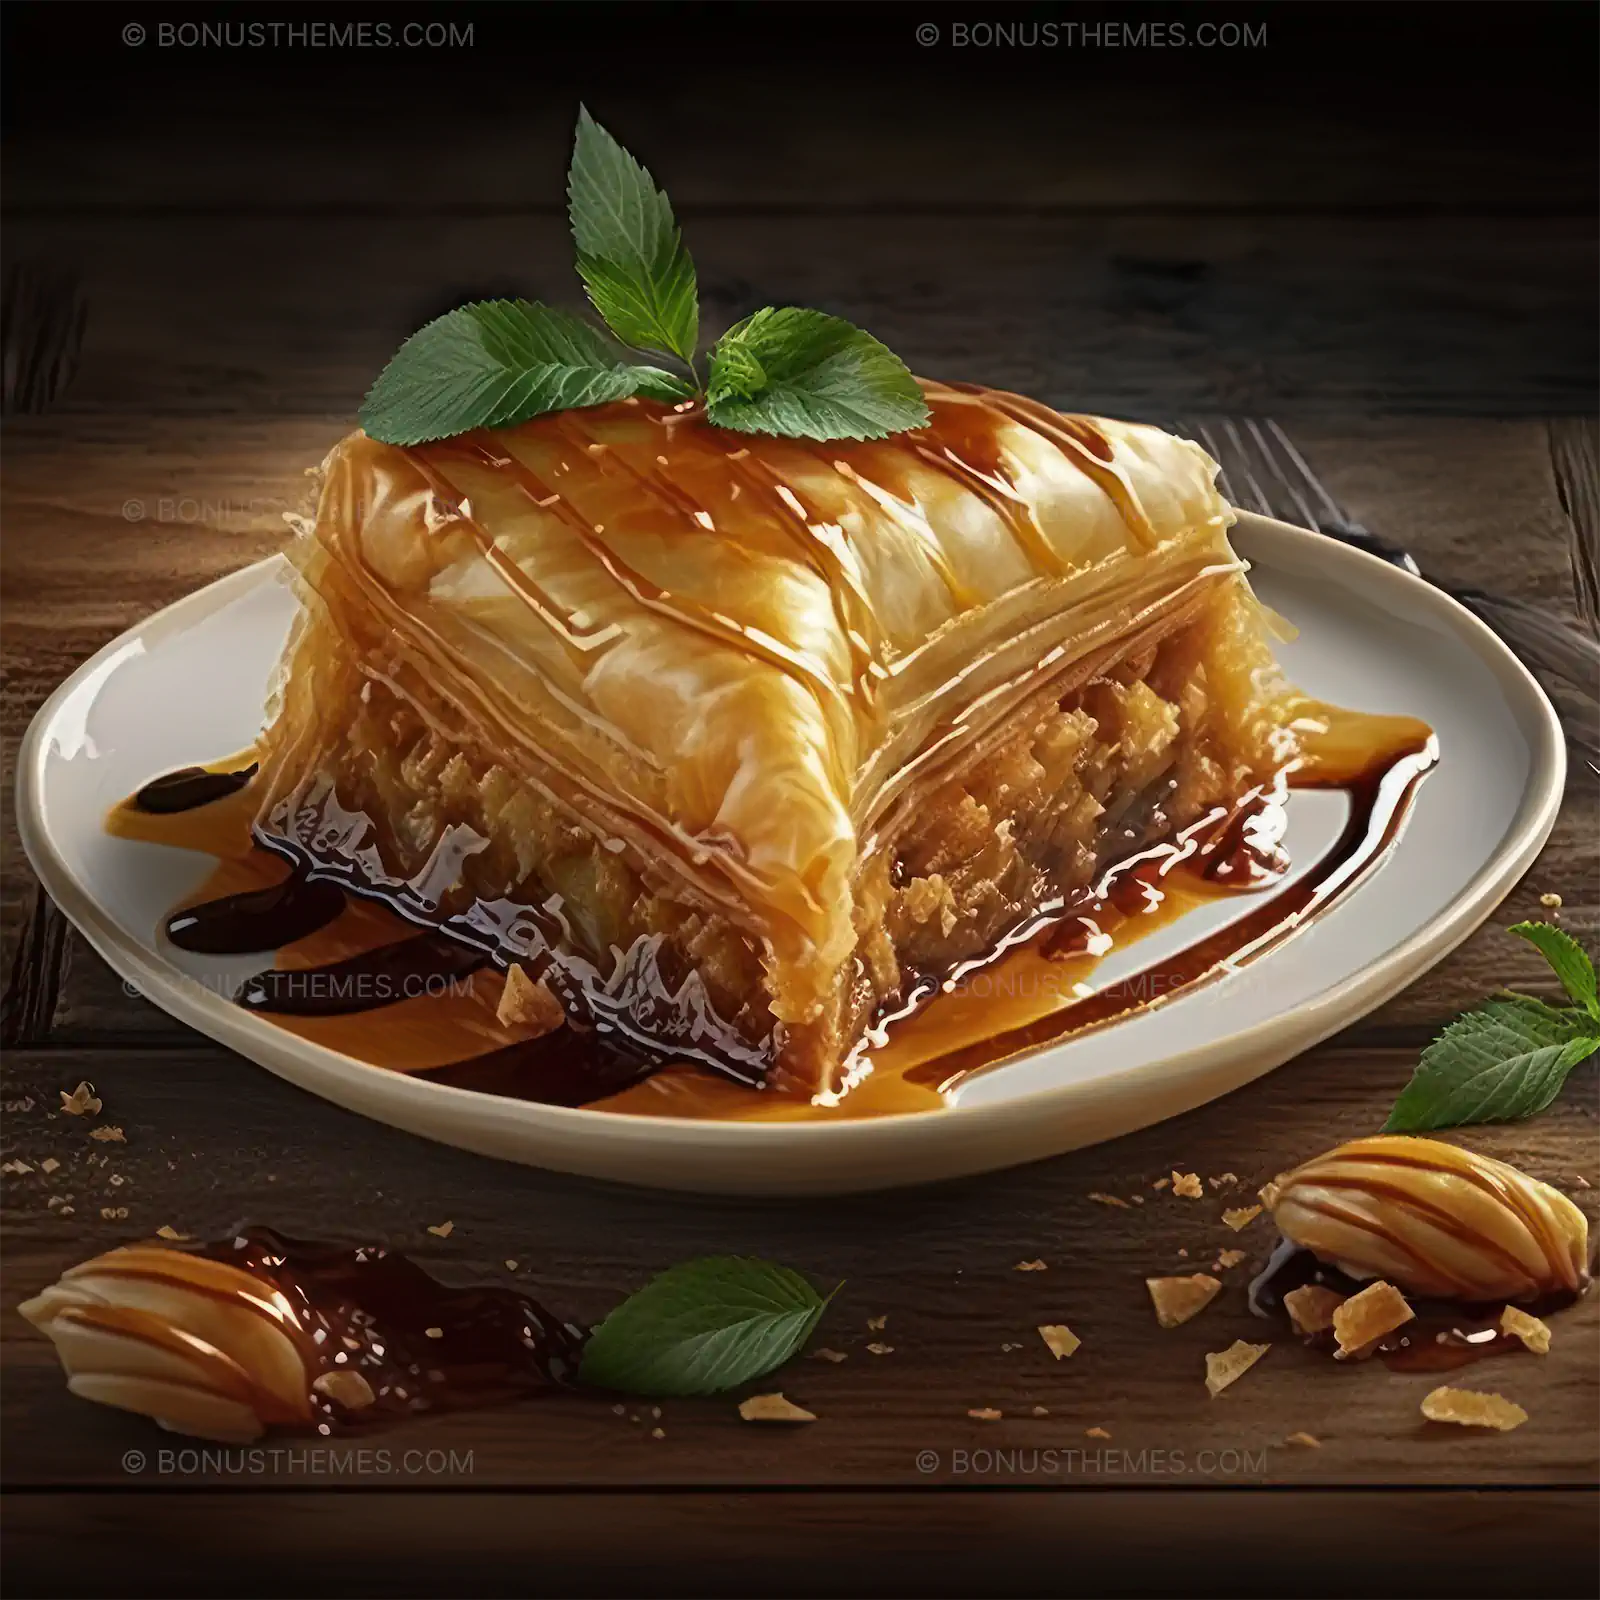 Piece of baklava on a plate with honey syrup